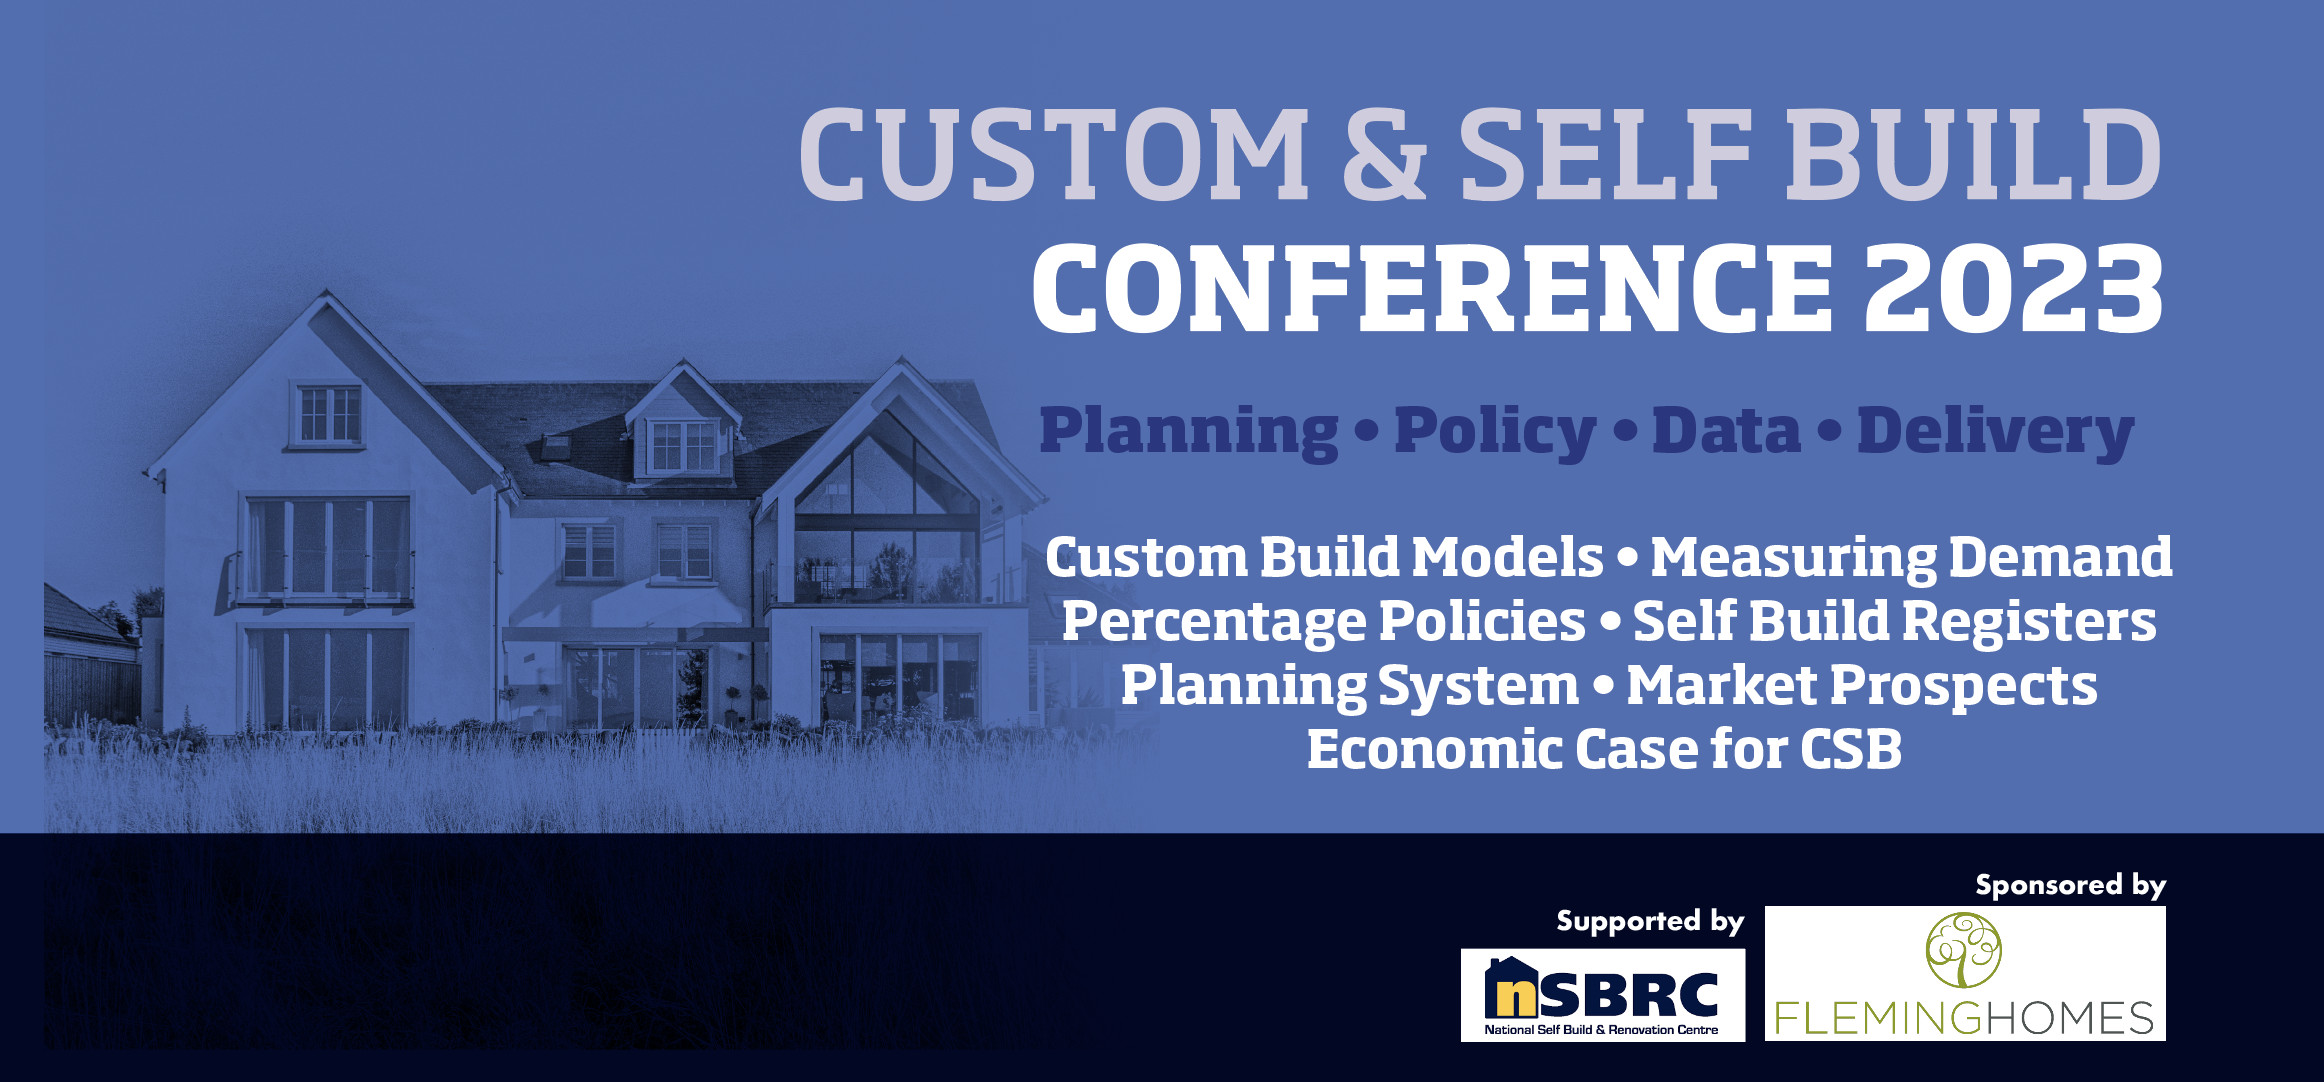 Custom and Self Build Conference 2022